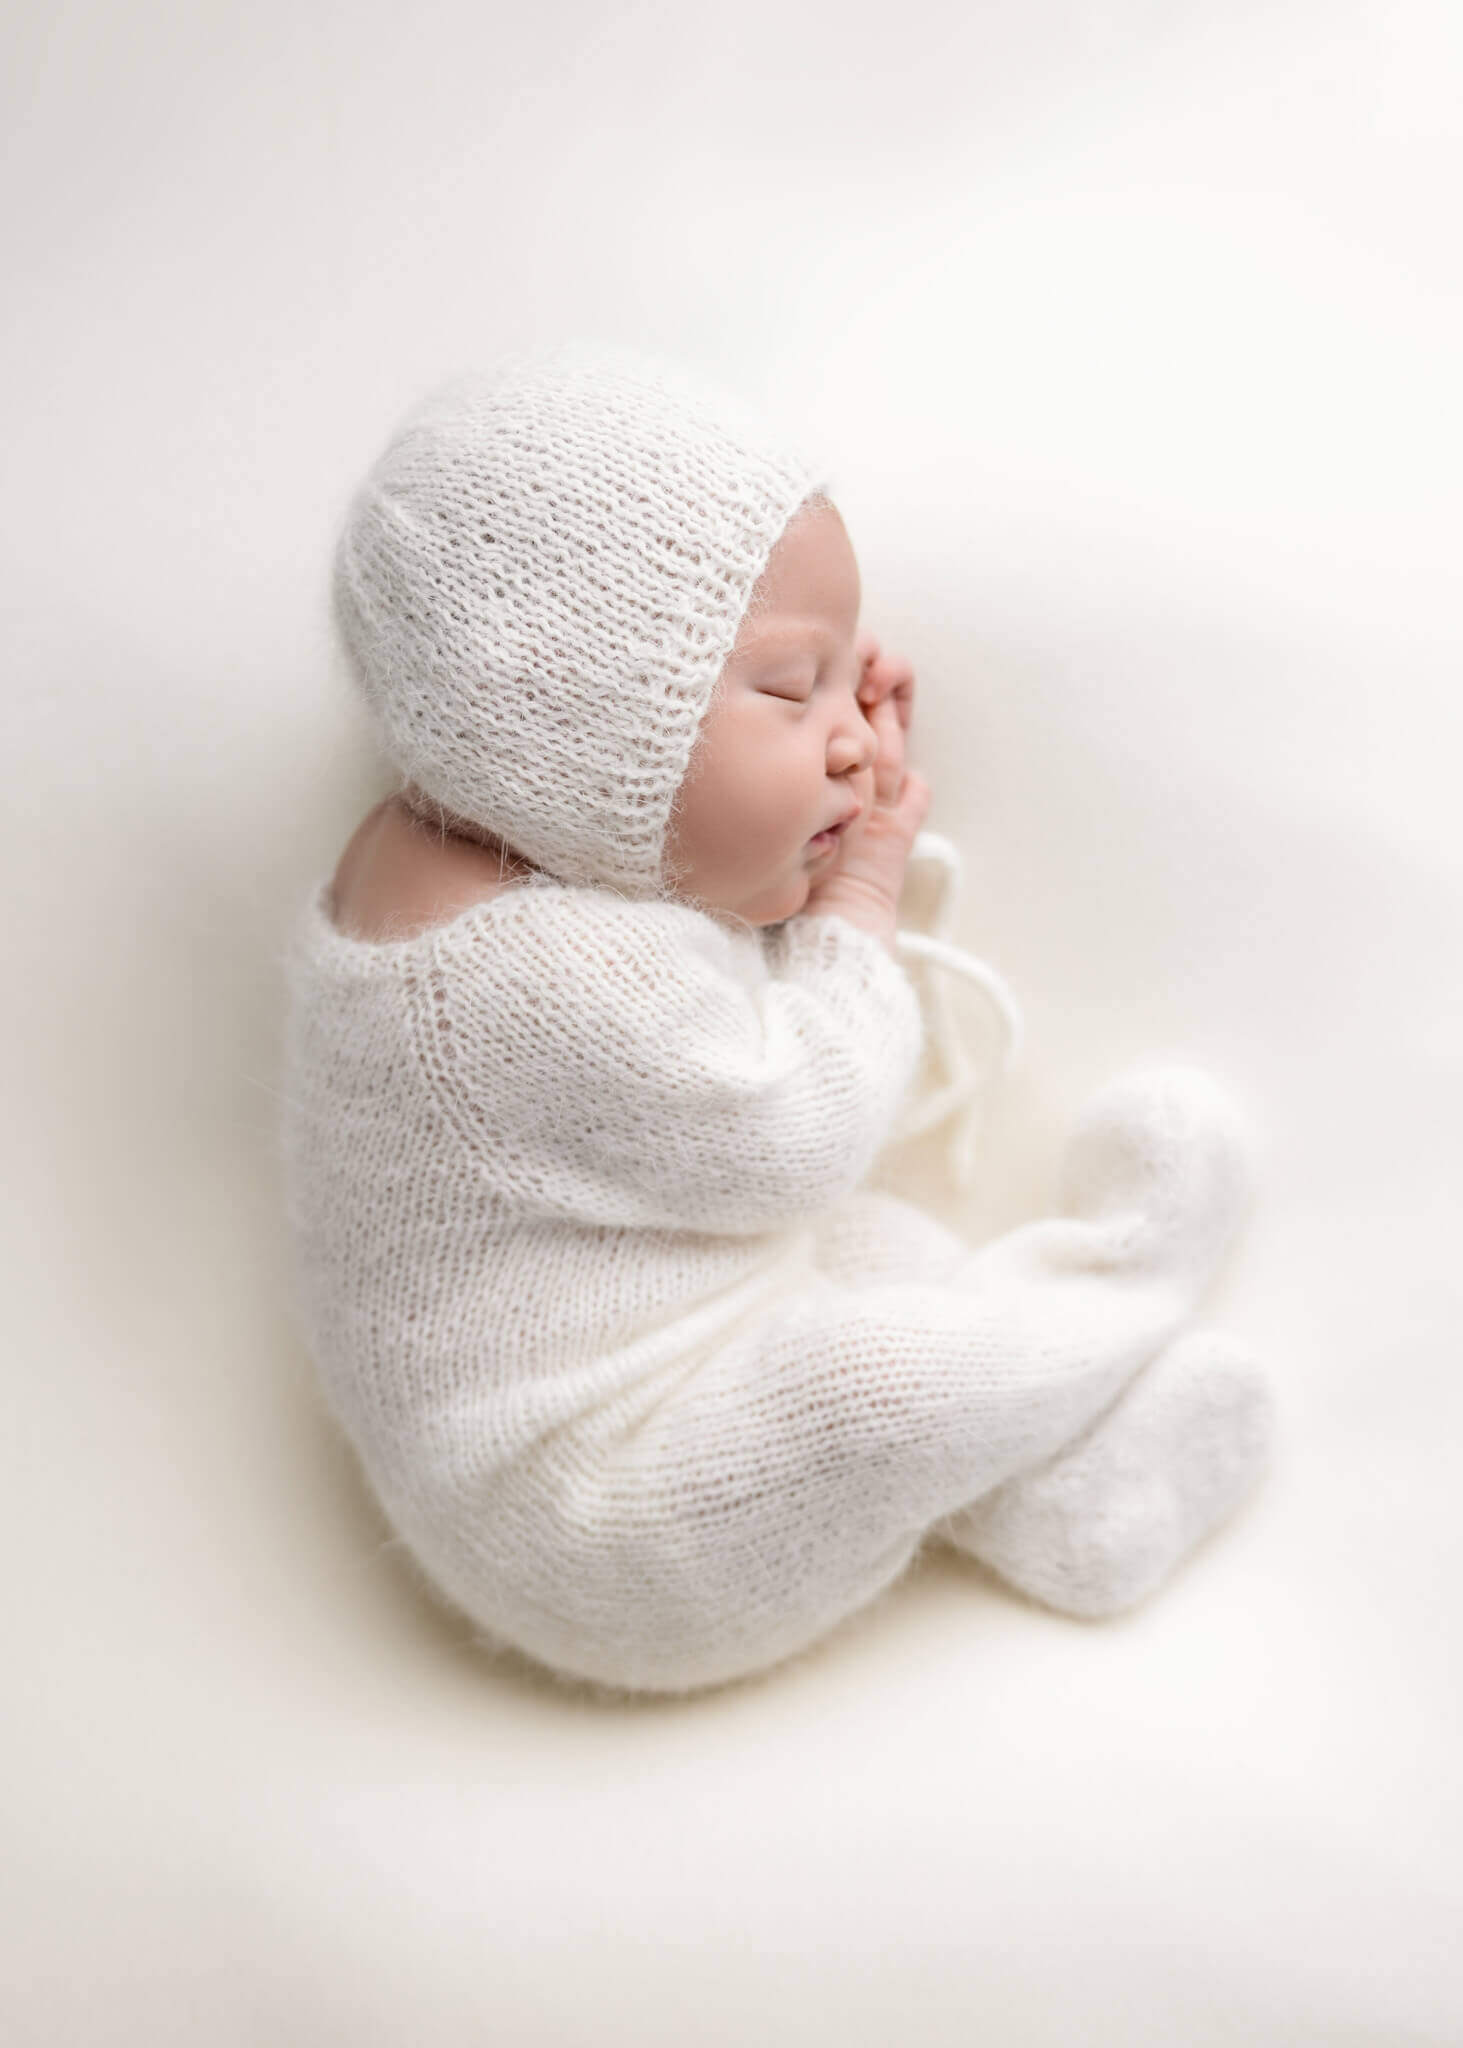 newborn baby in white romper with a white bonnet sleeping on a her side on a white blanket